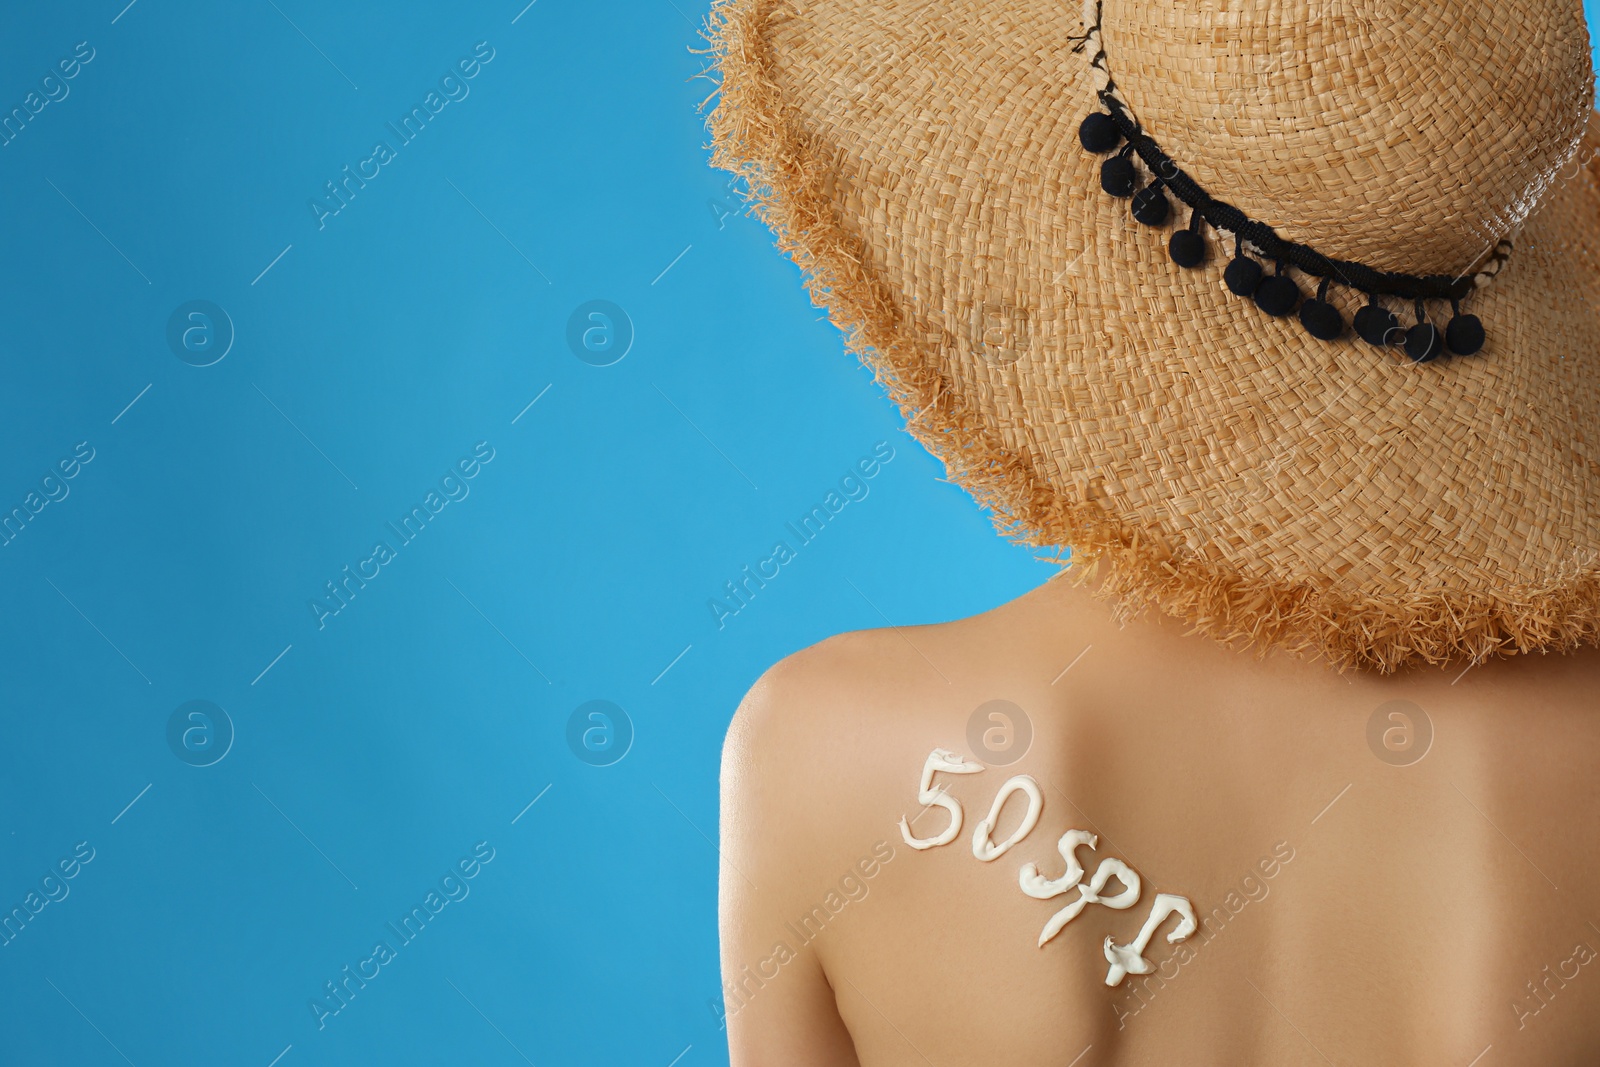 Photo of 50 SPF written with sun protection cream on woman's back against light blue background. Space for text